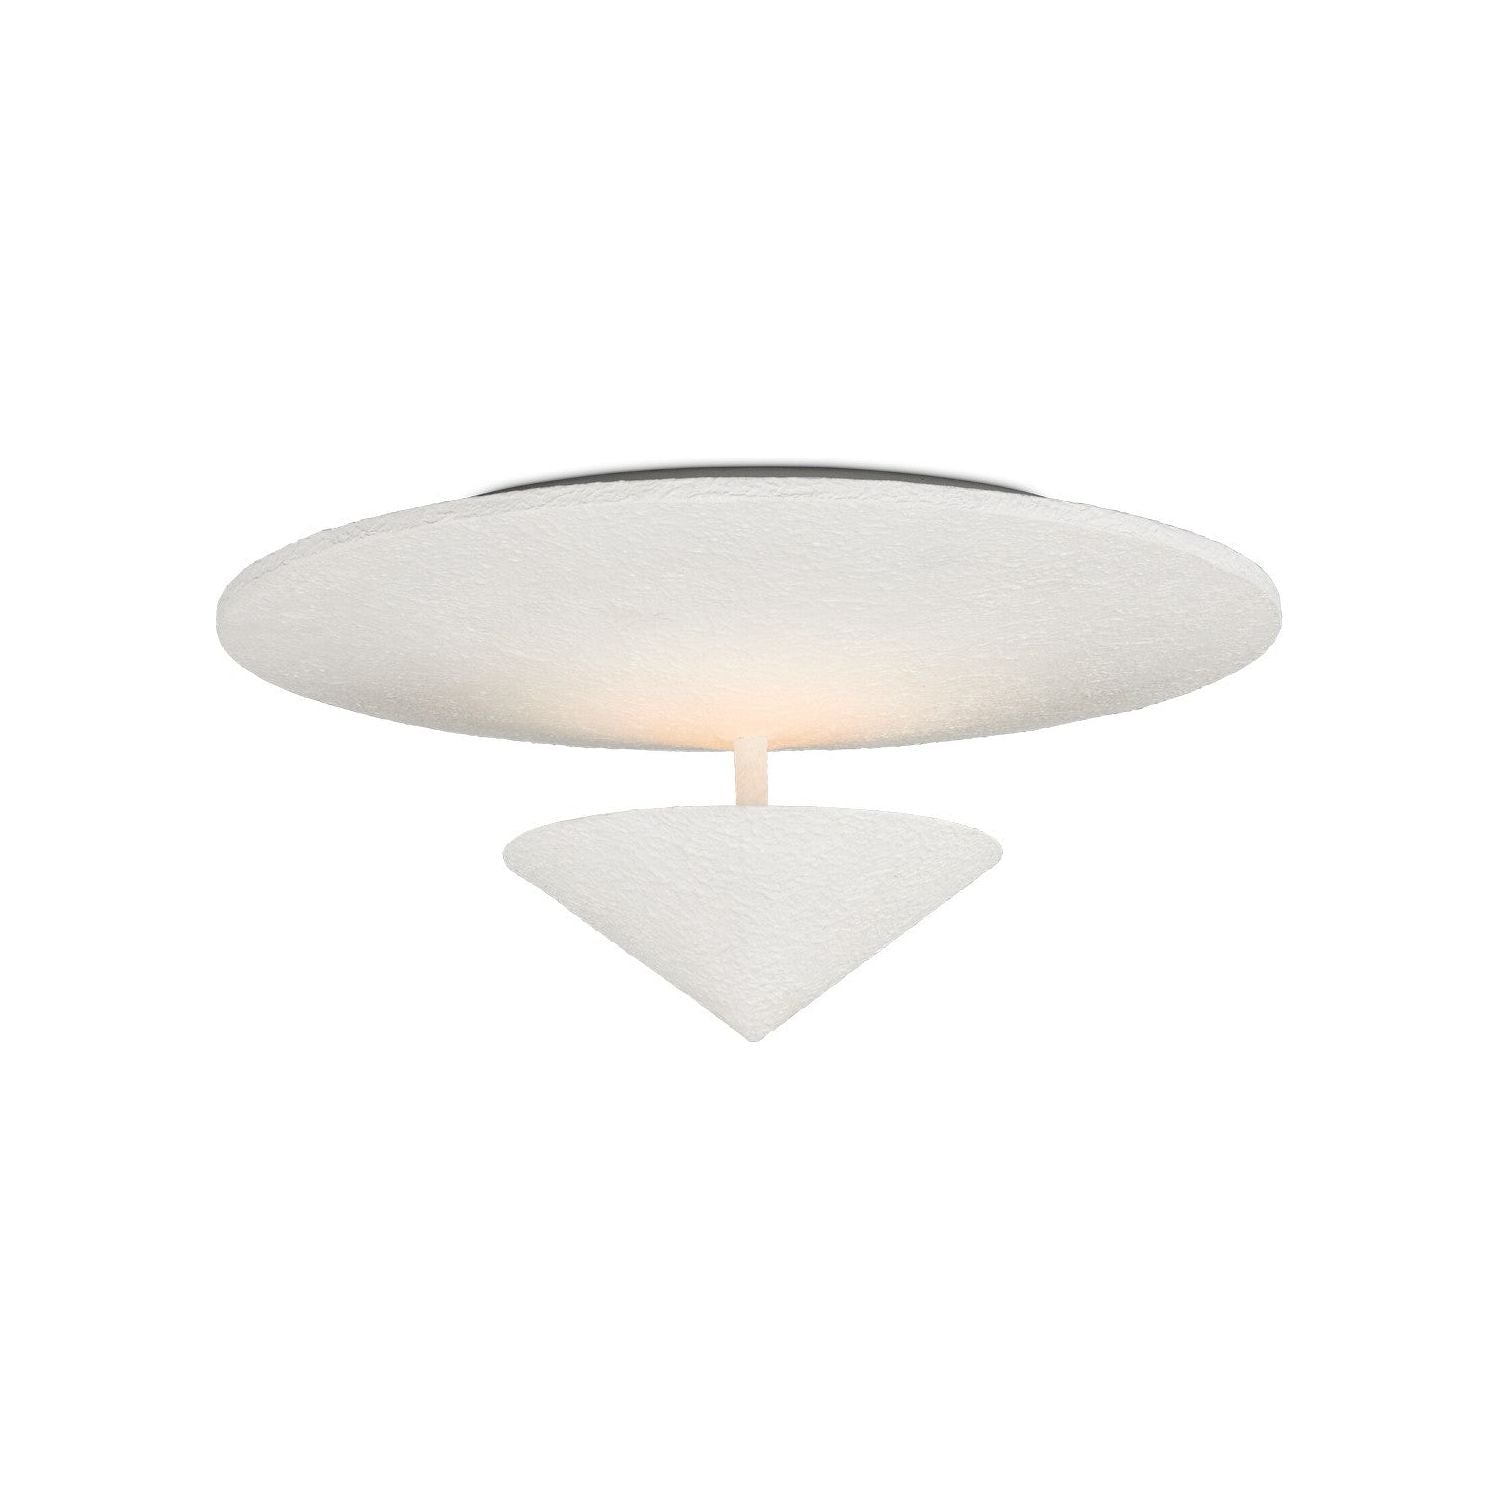 Currey and Company - 9999-0075 - One Light Flush Mount - Yeso Blanco